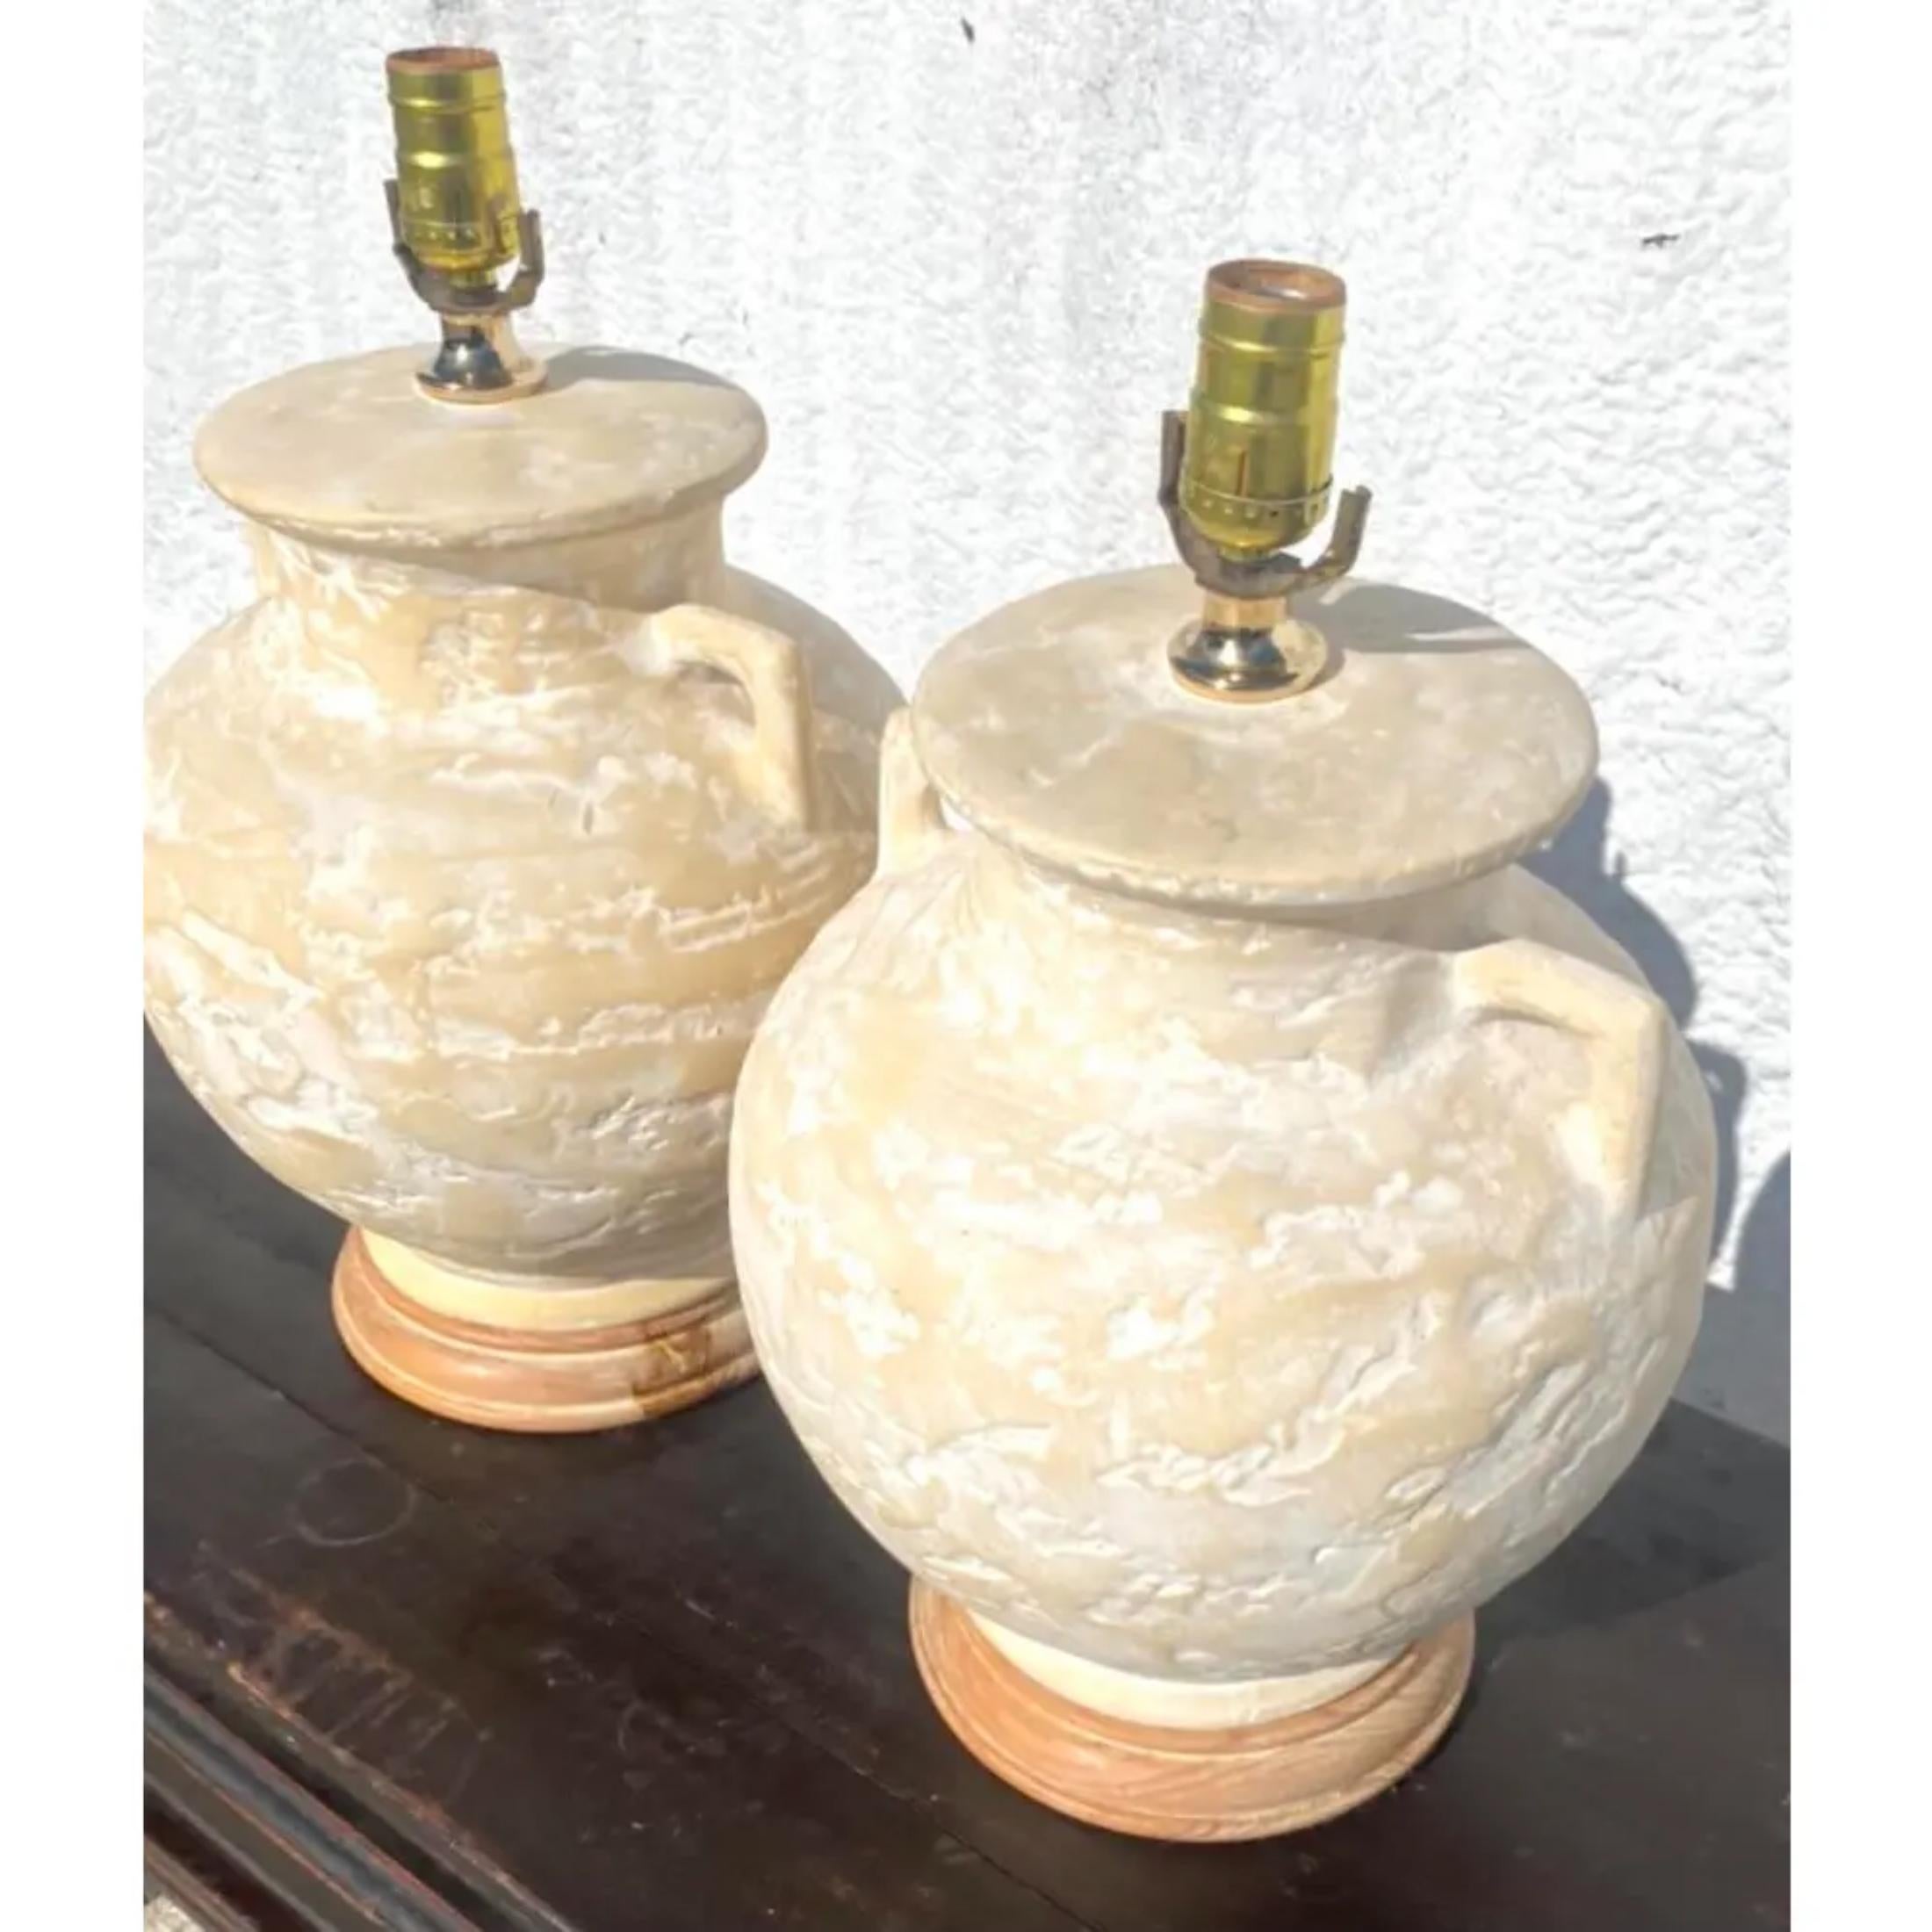 Fabulous pair of vintage plaster urn lamps. Beautiful textured finish that rests on a lime wash plinth. A lovely pale color. Acquired from a Palm Beach estate.